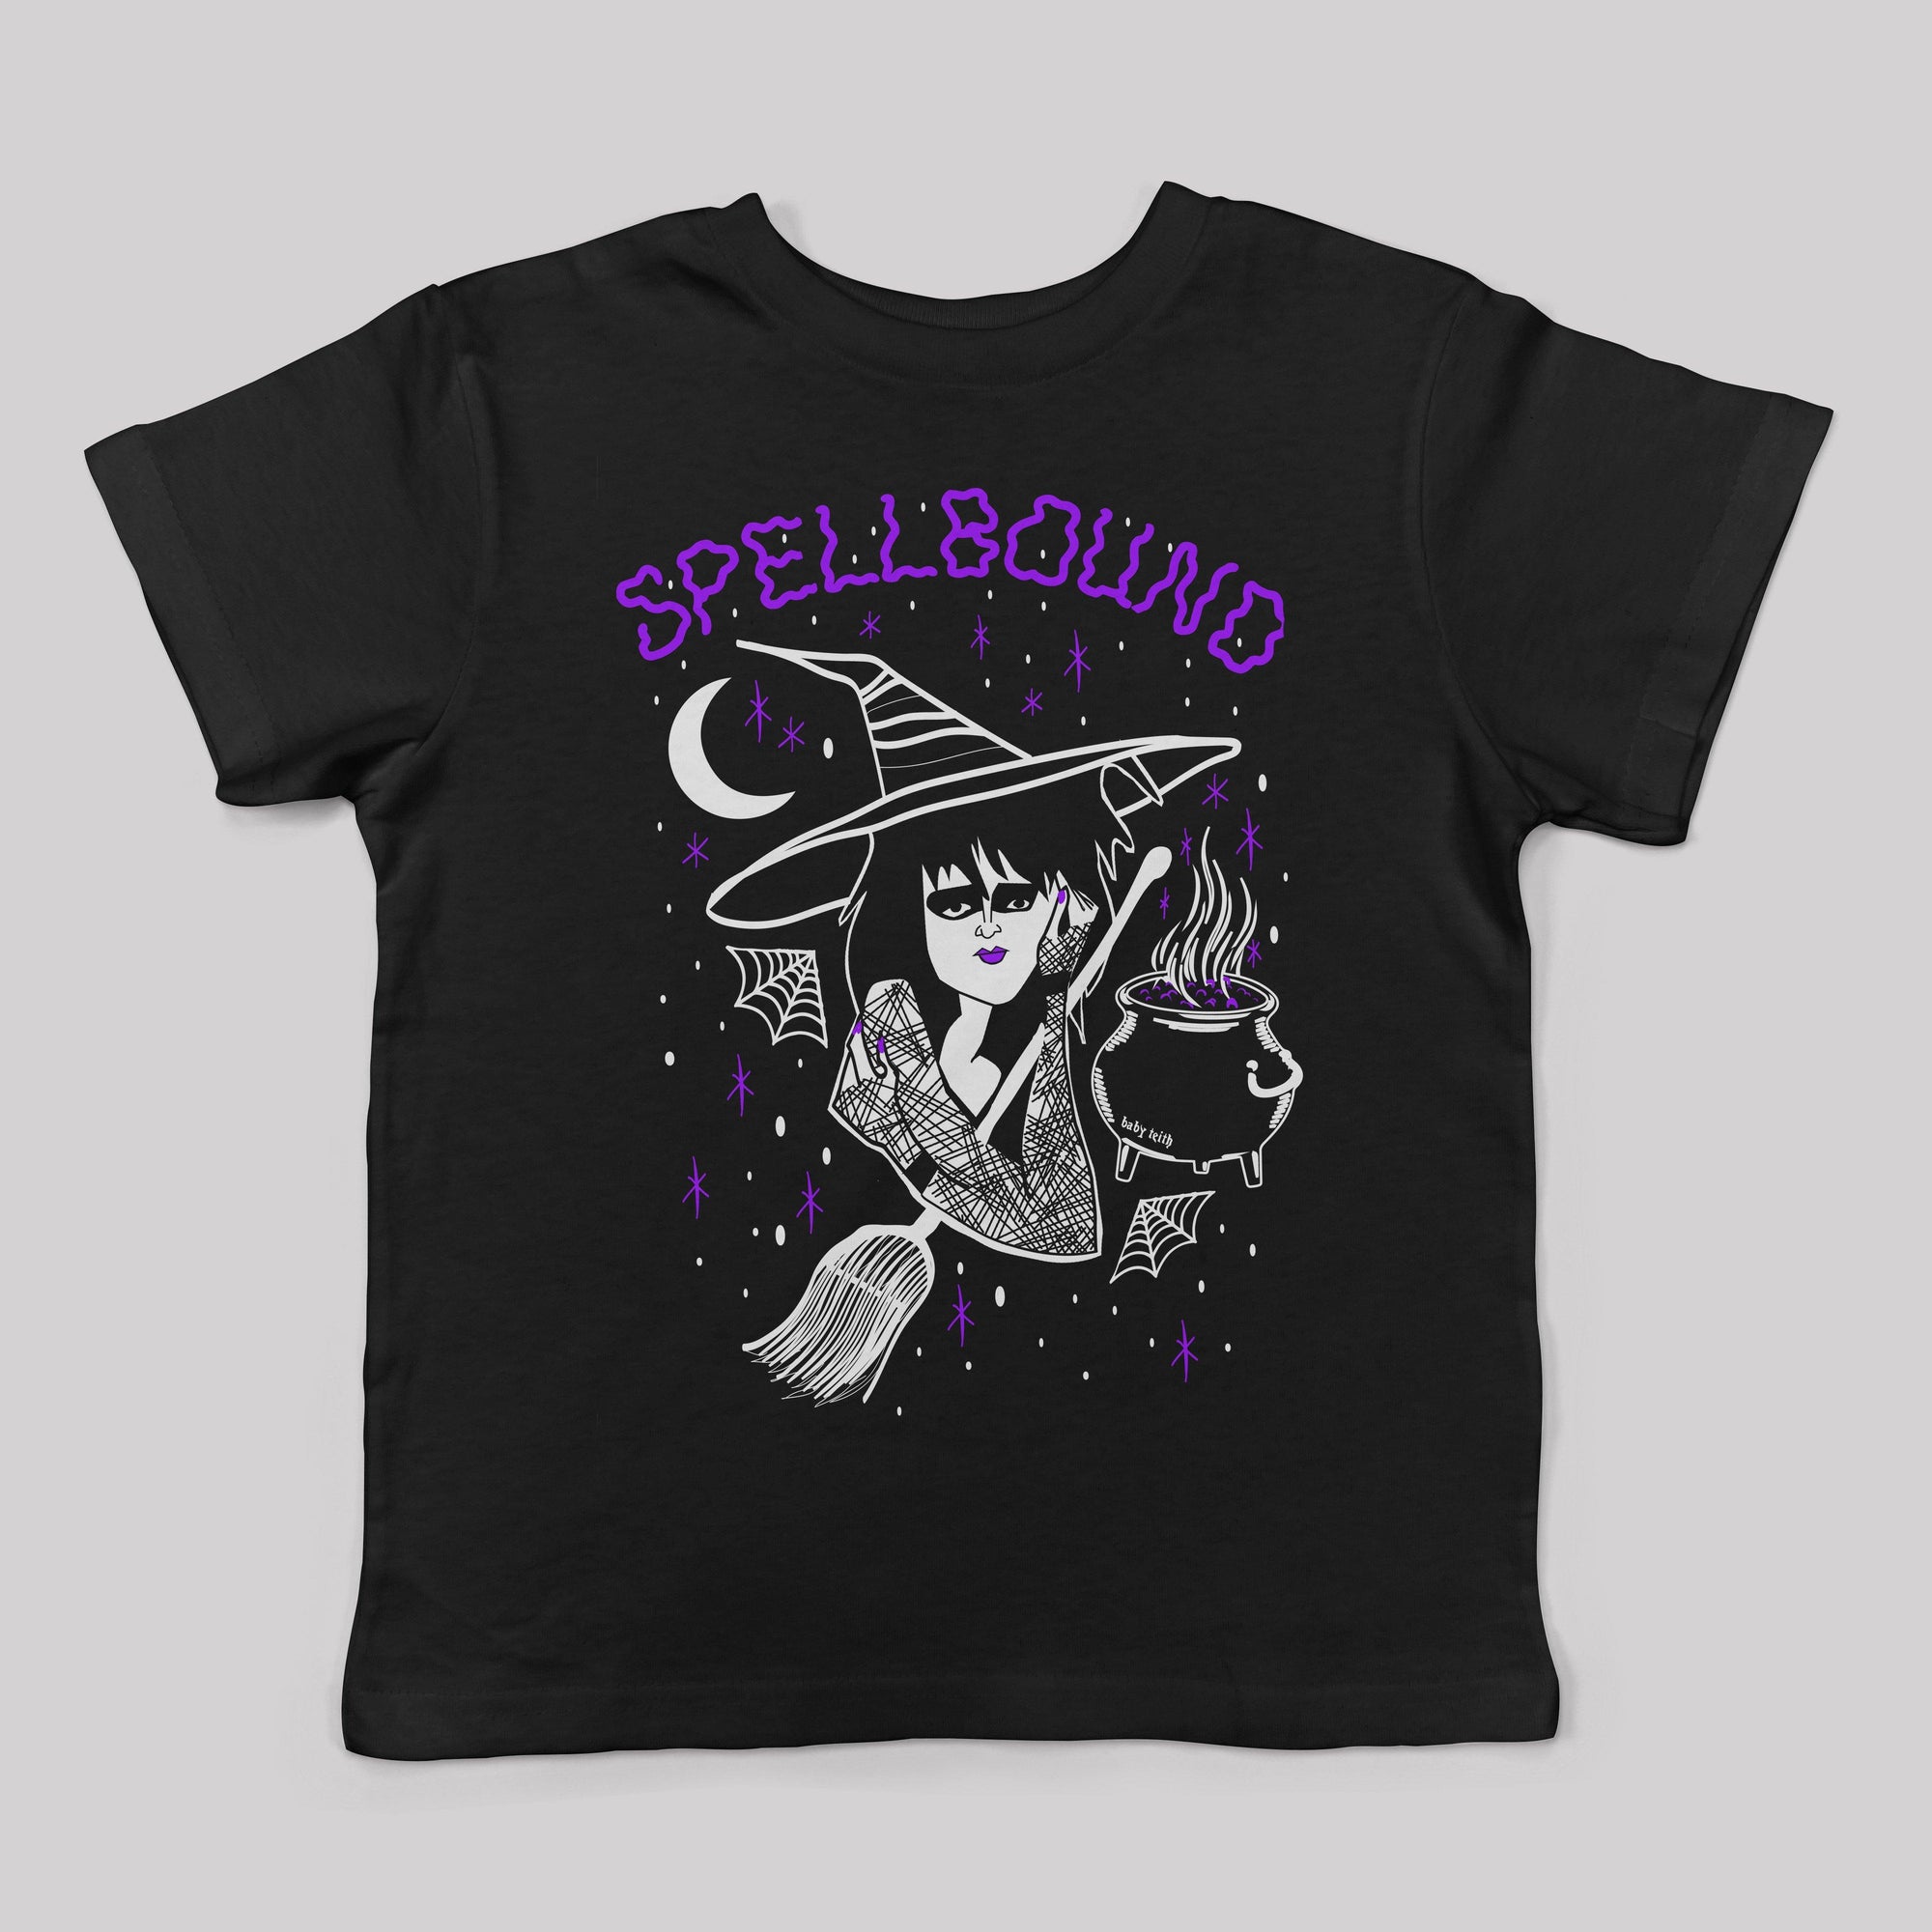 Spellbound Kids Tee - Baby Teith